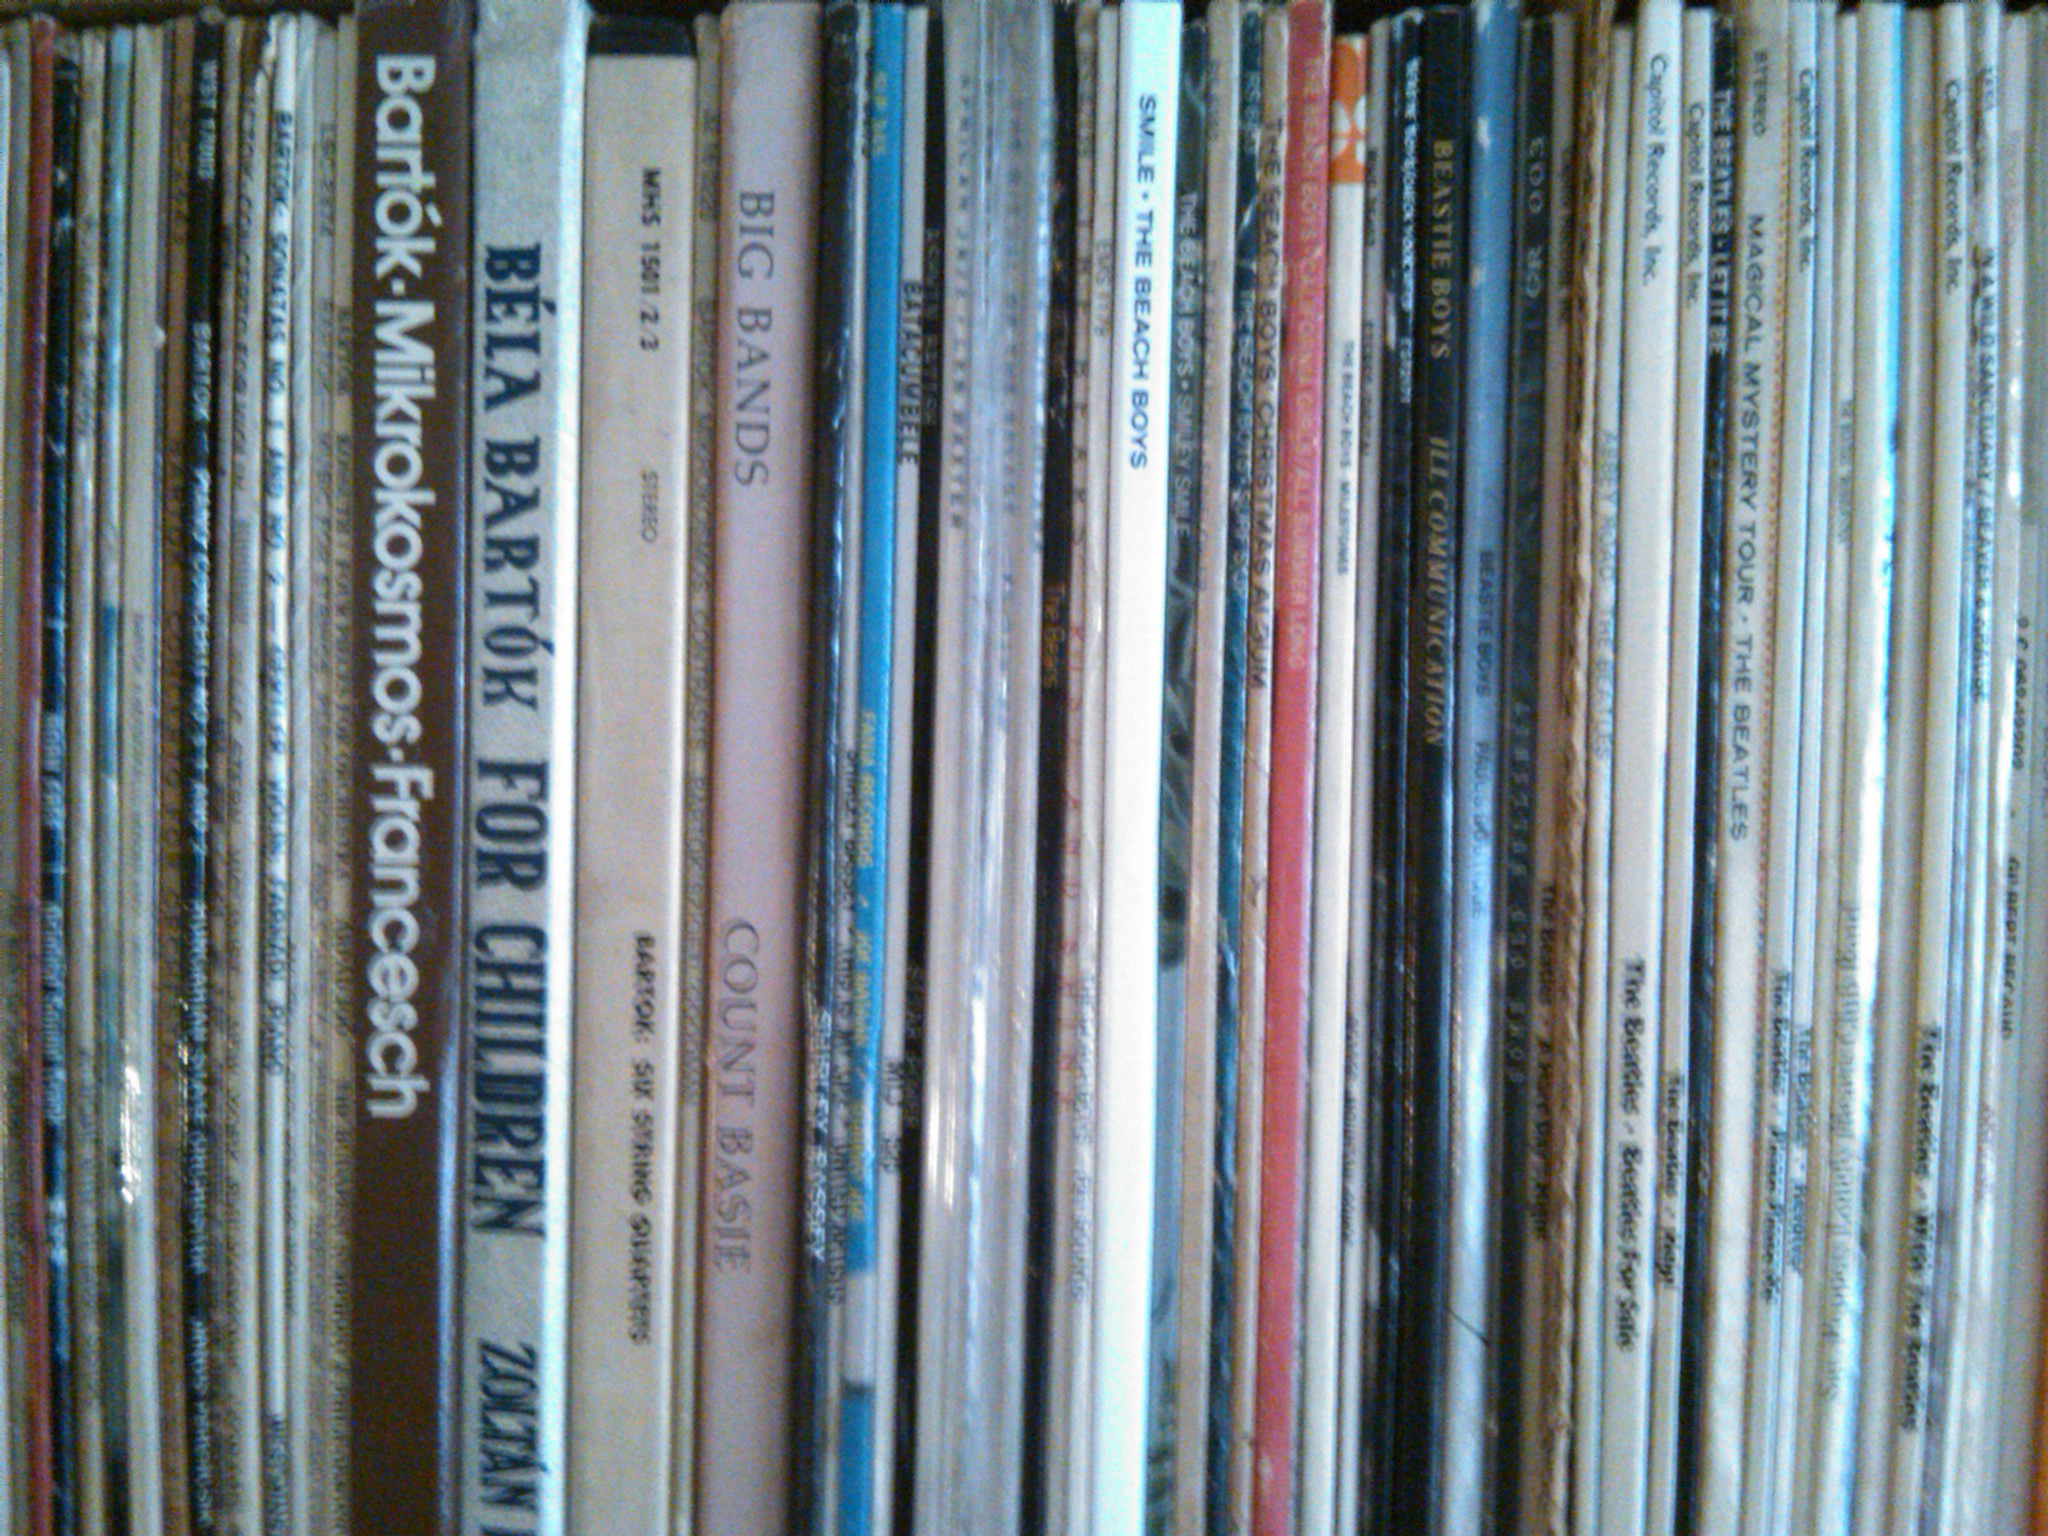 A close up of a row of LPs on a shelf showing The Beach Boys' Smile alongside albums of Bartok, Basie, The Beatles, and others.